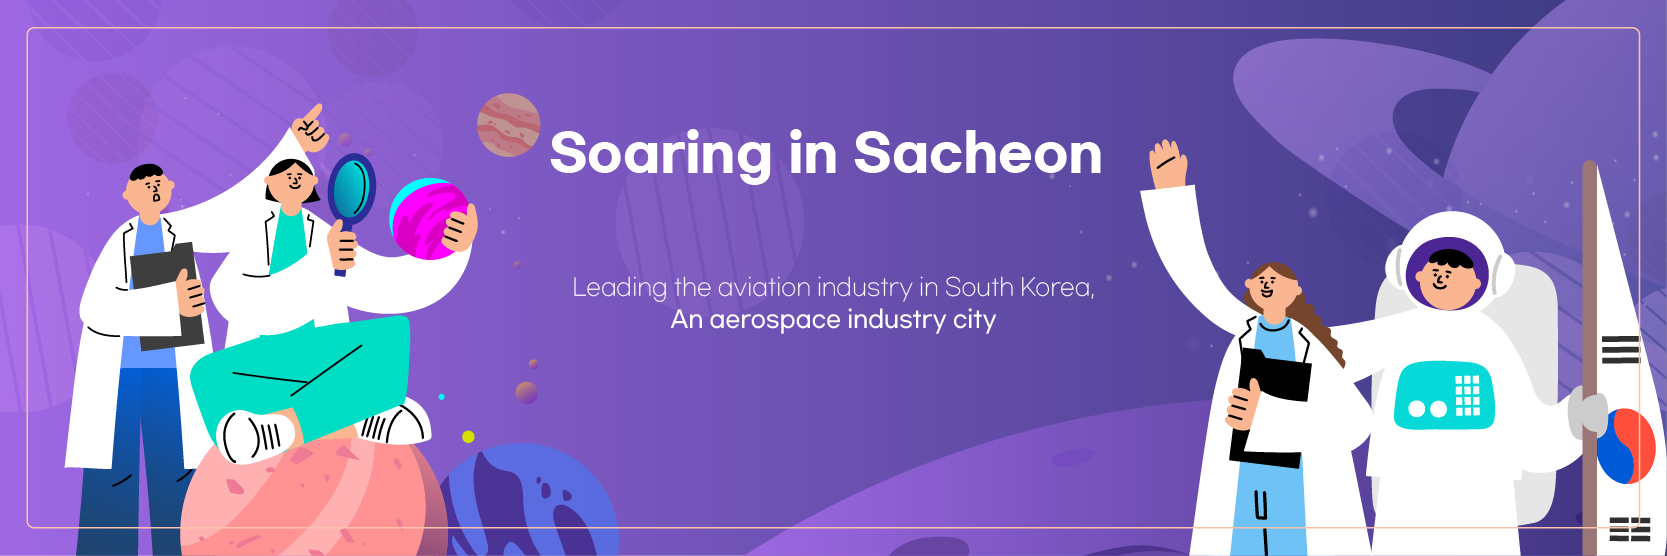 Soaring in Sacheon - Leading the aviation industry in South Korea, An aerospace industry city